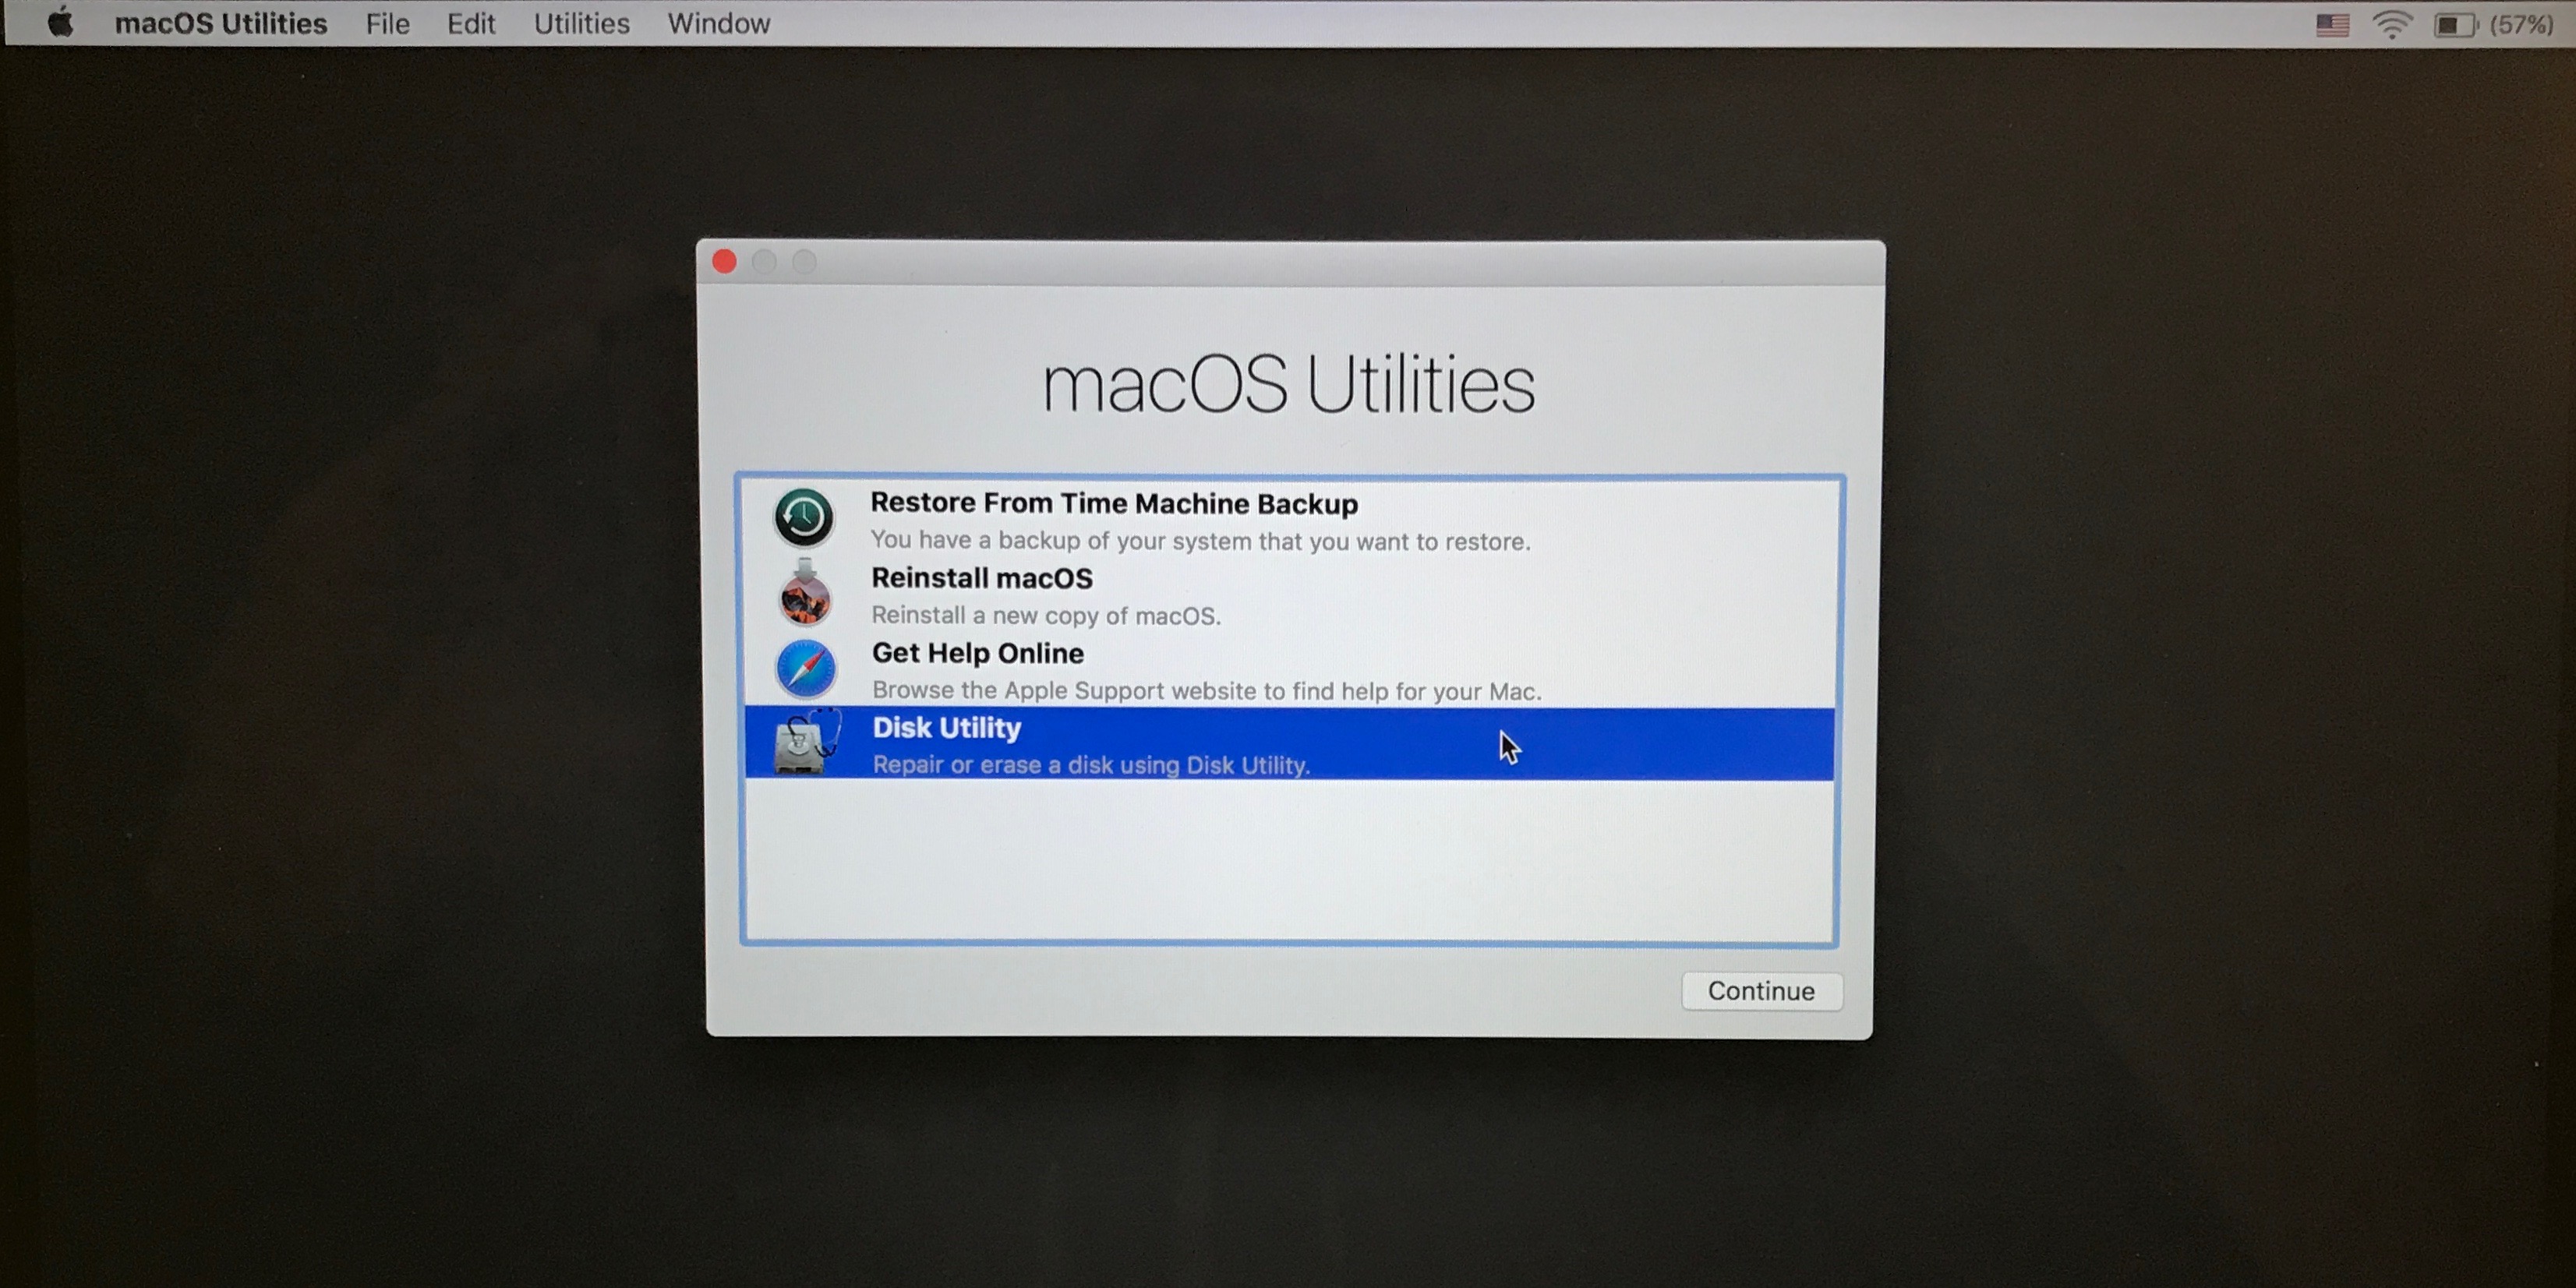 how to securely erase mac before seling it